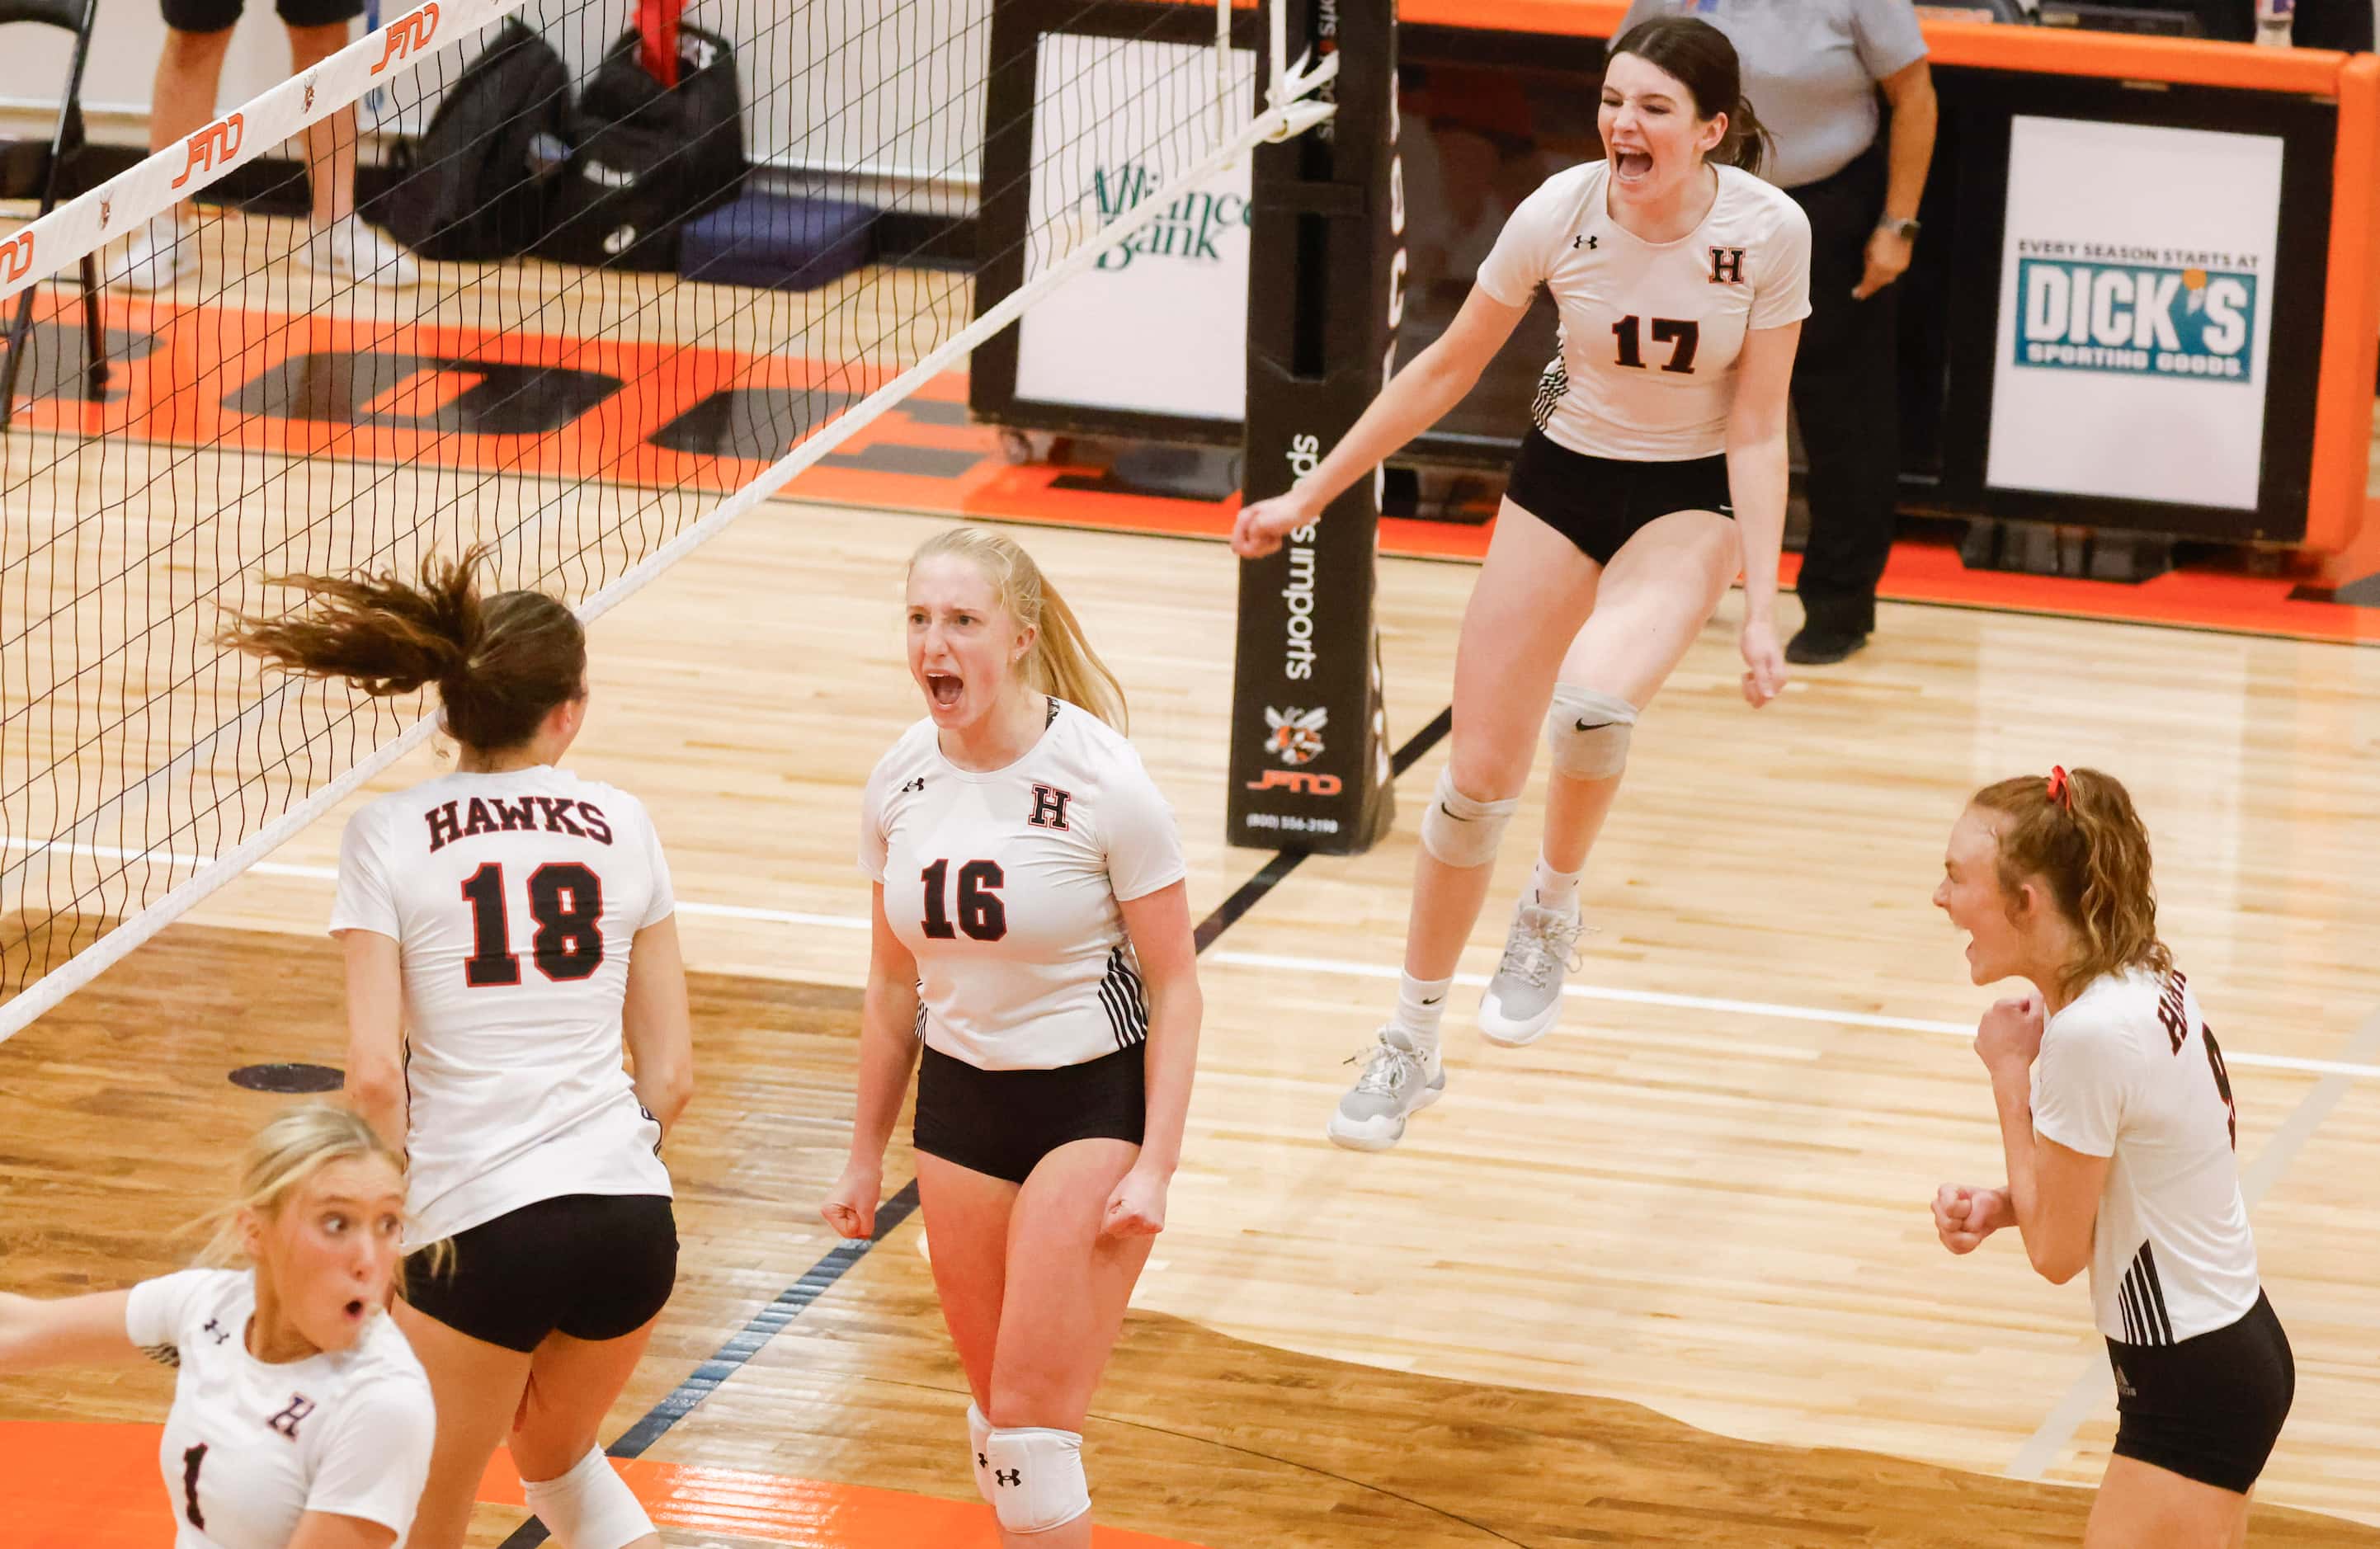 Rockwall Heath’s Abby Lemp (18), Logan Younger (16) and gave McHenry (17) cheer after a...